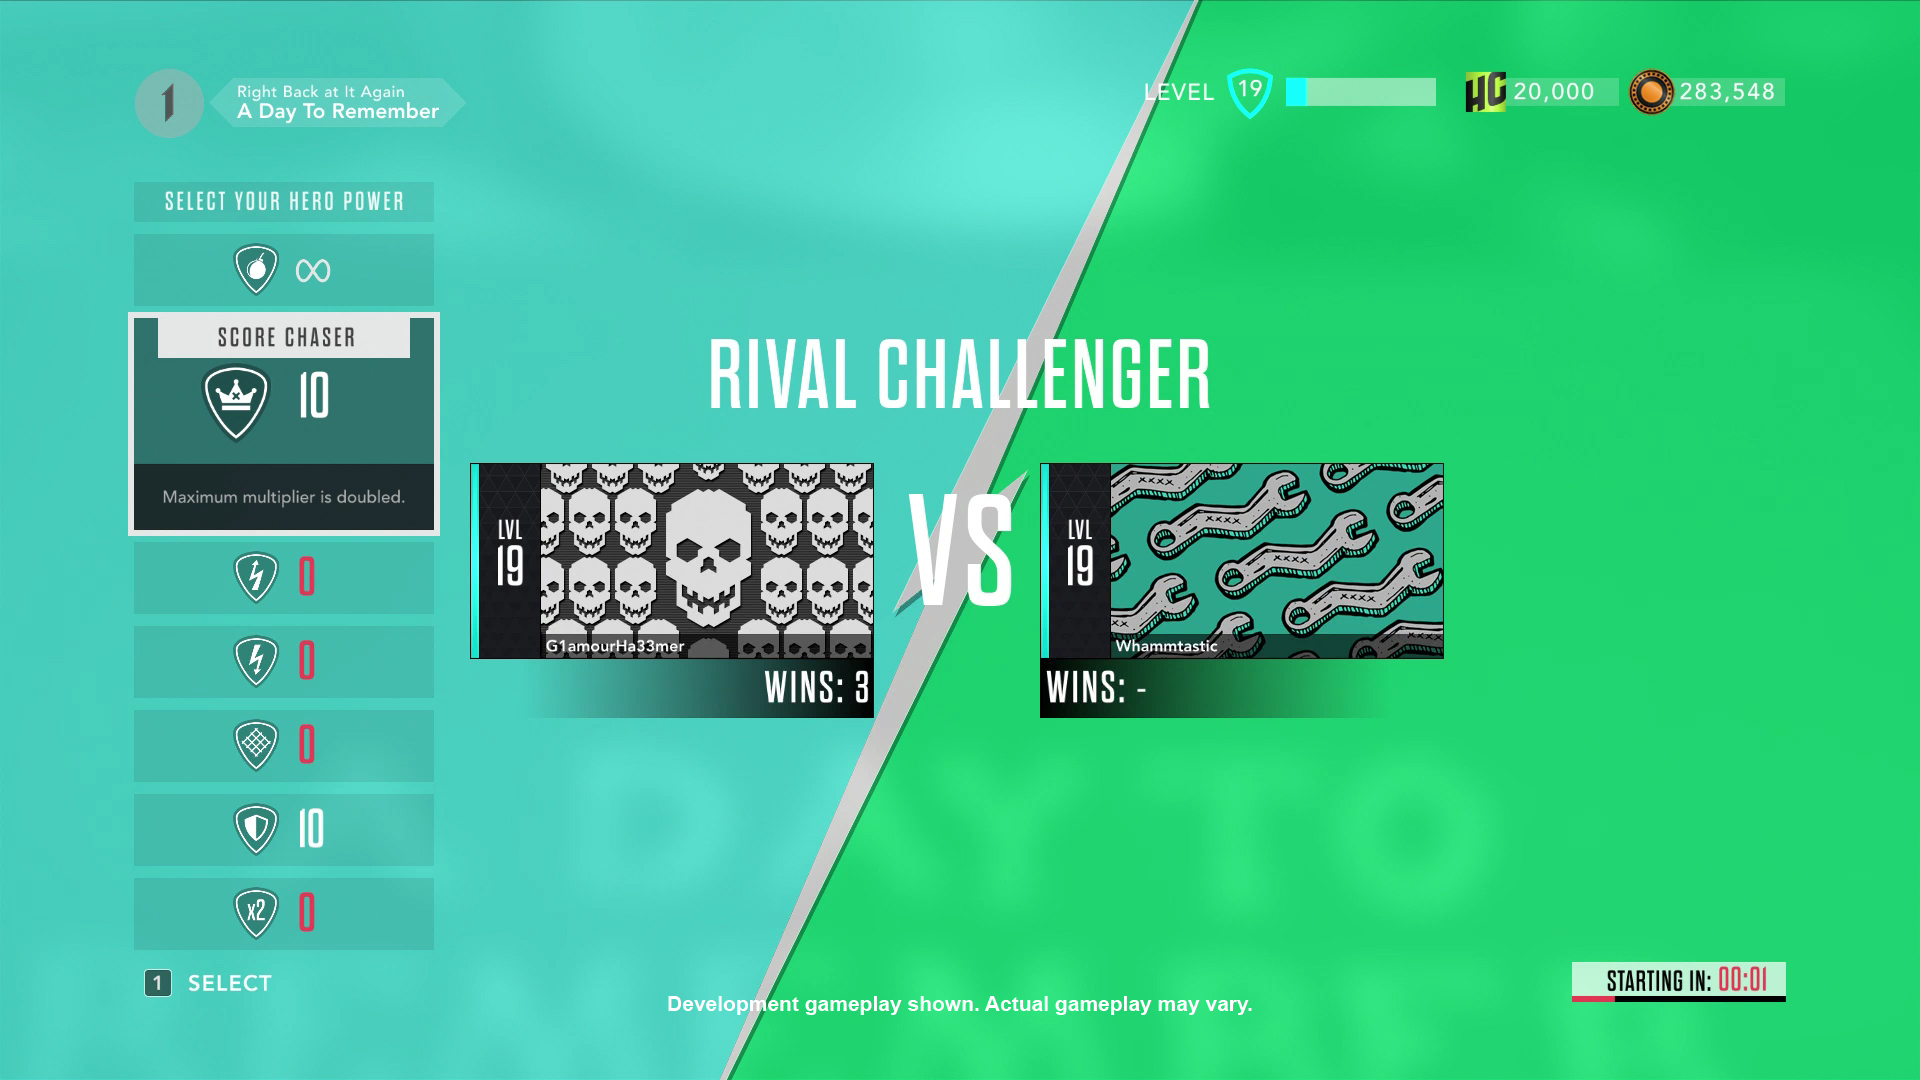 Guitar Hero Live online multiplayer Rival Challenges